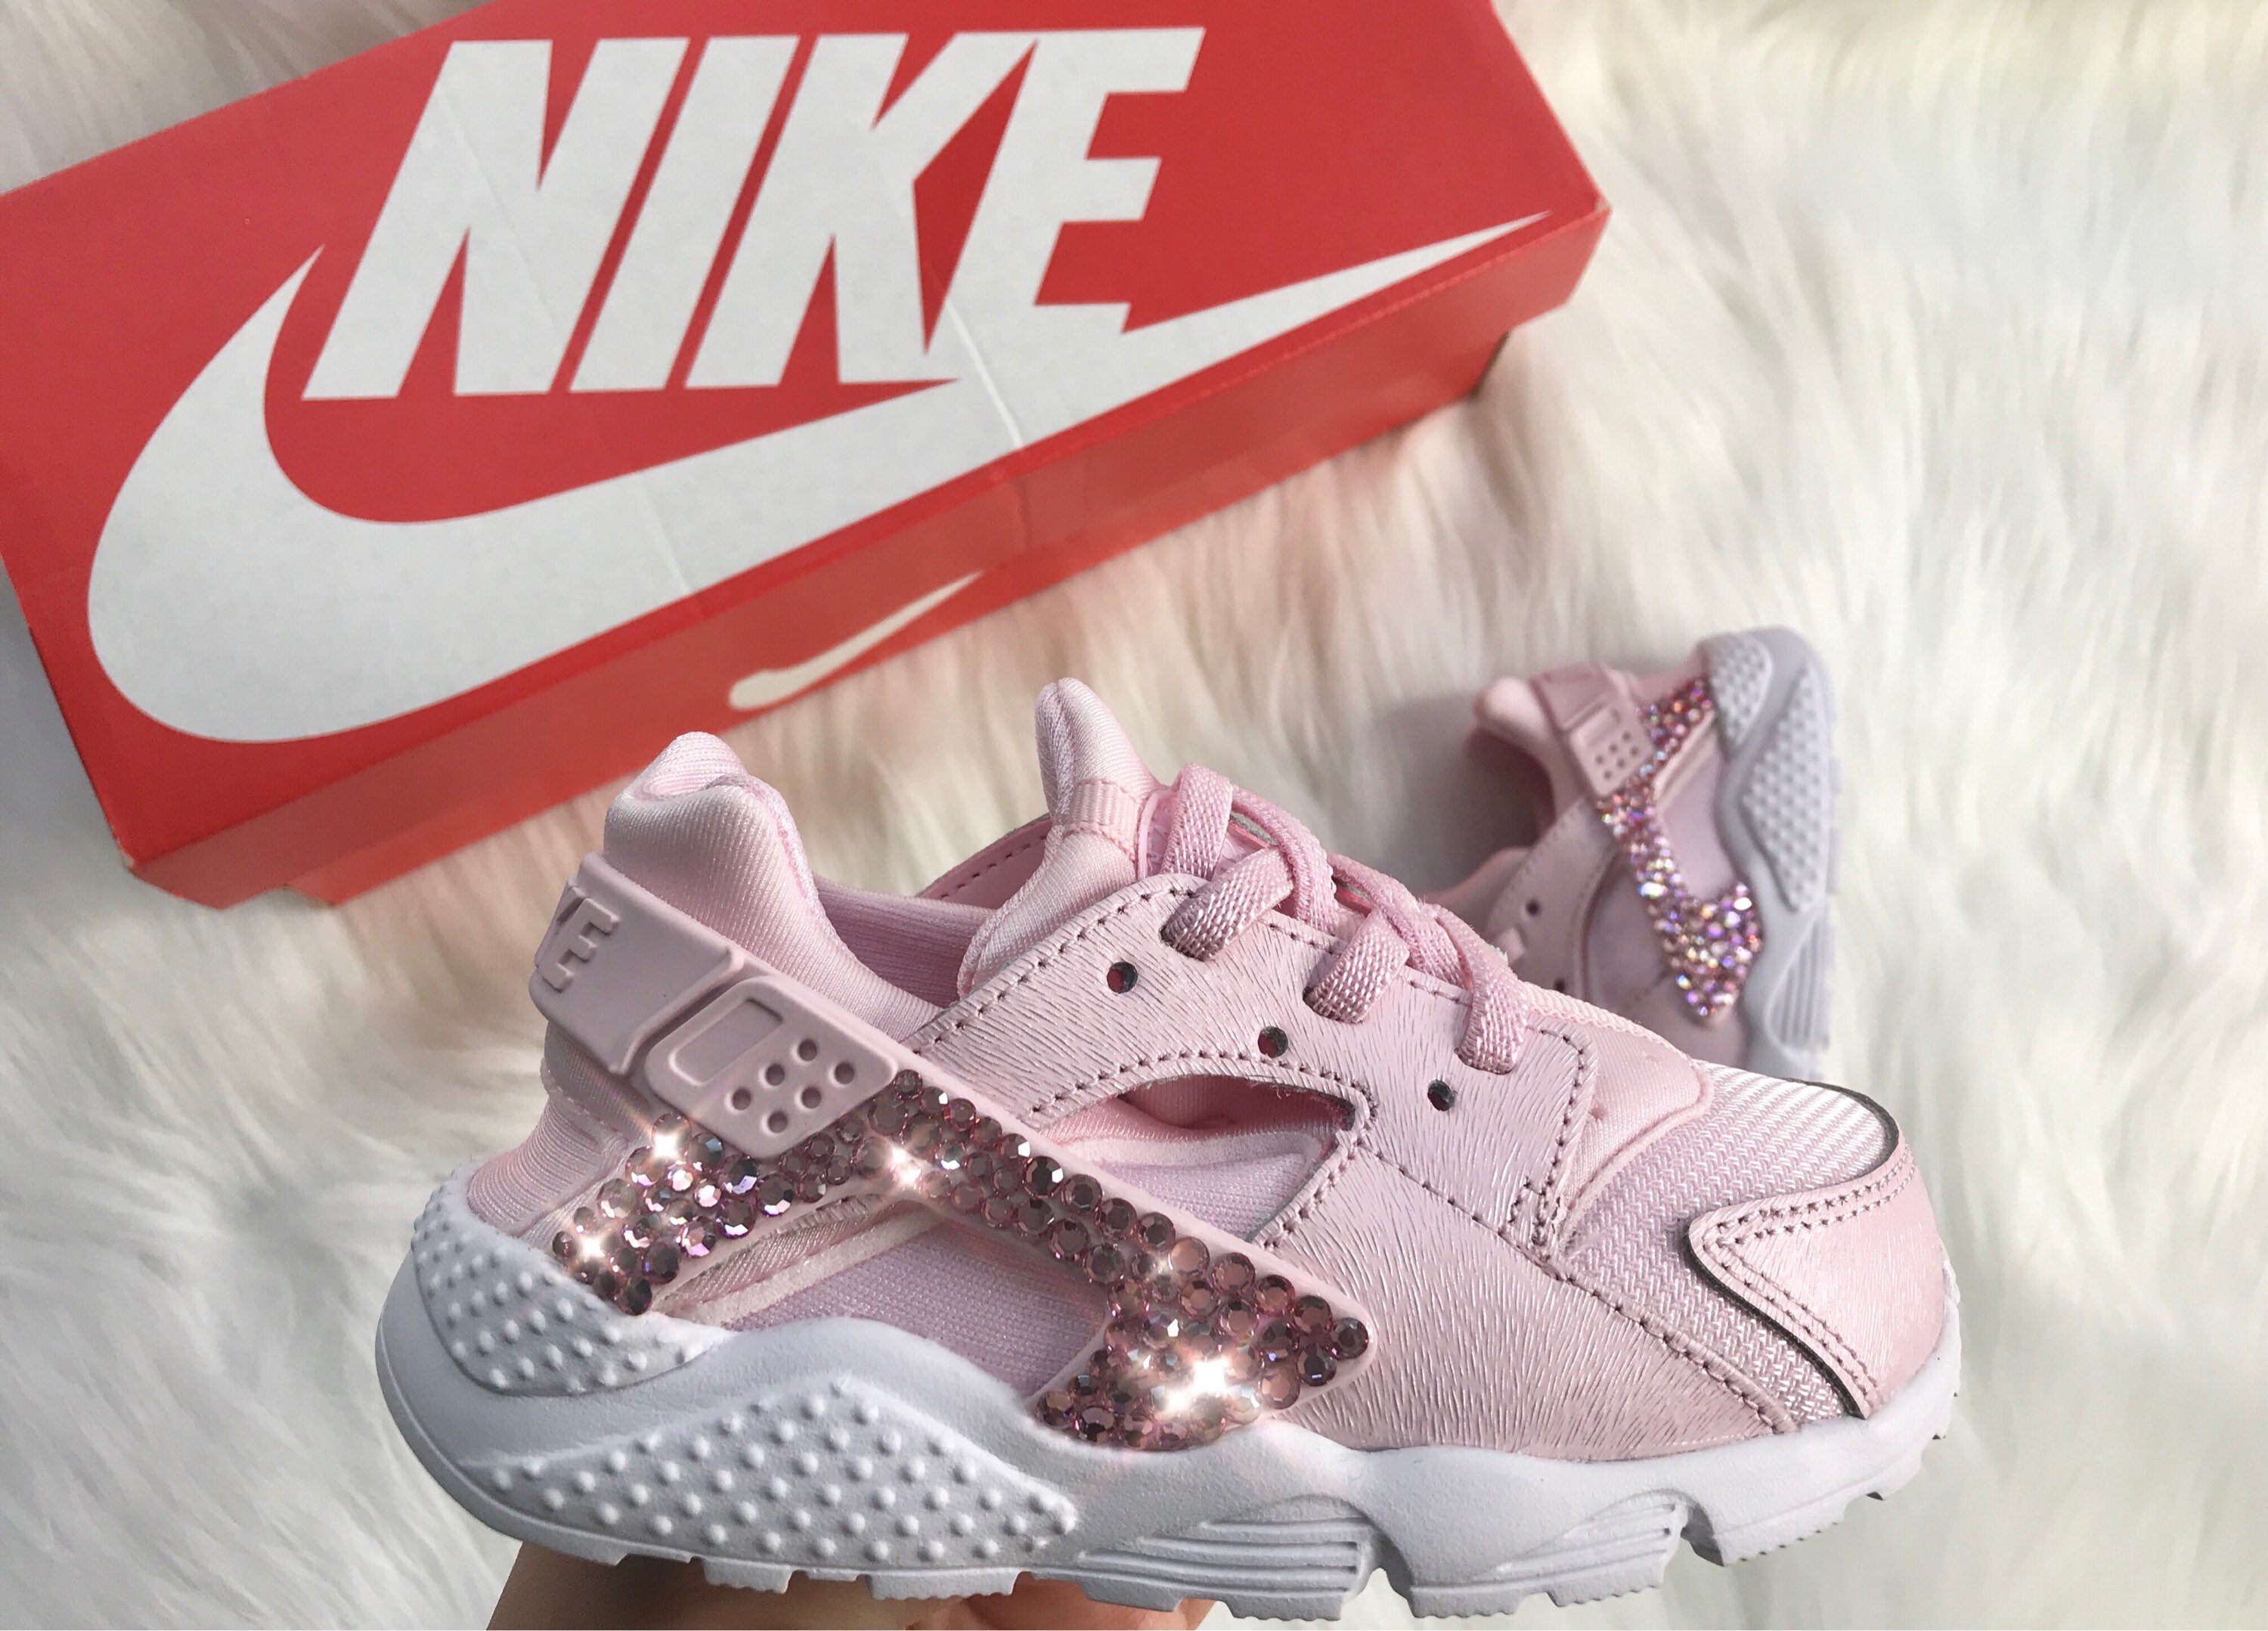 pink nike baby shoes